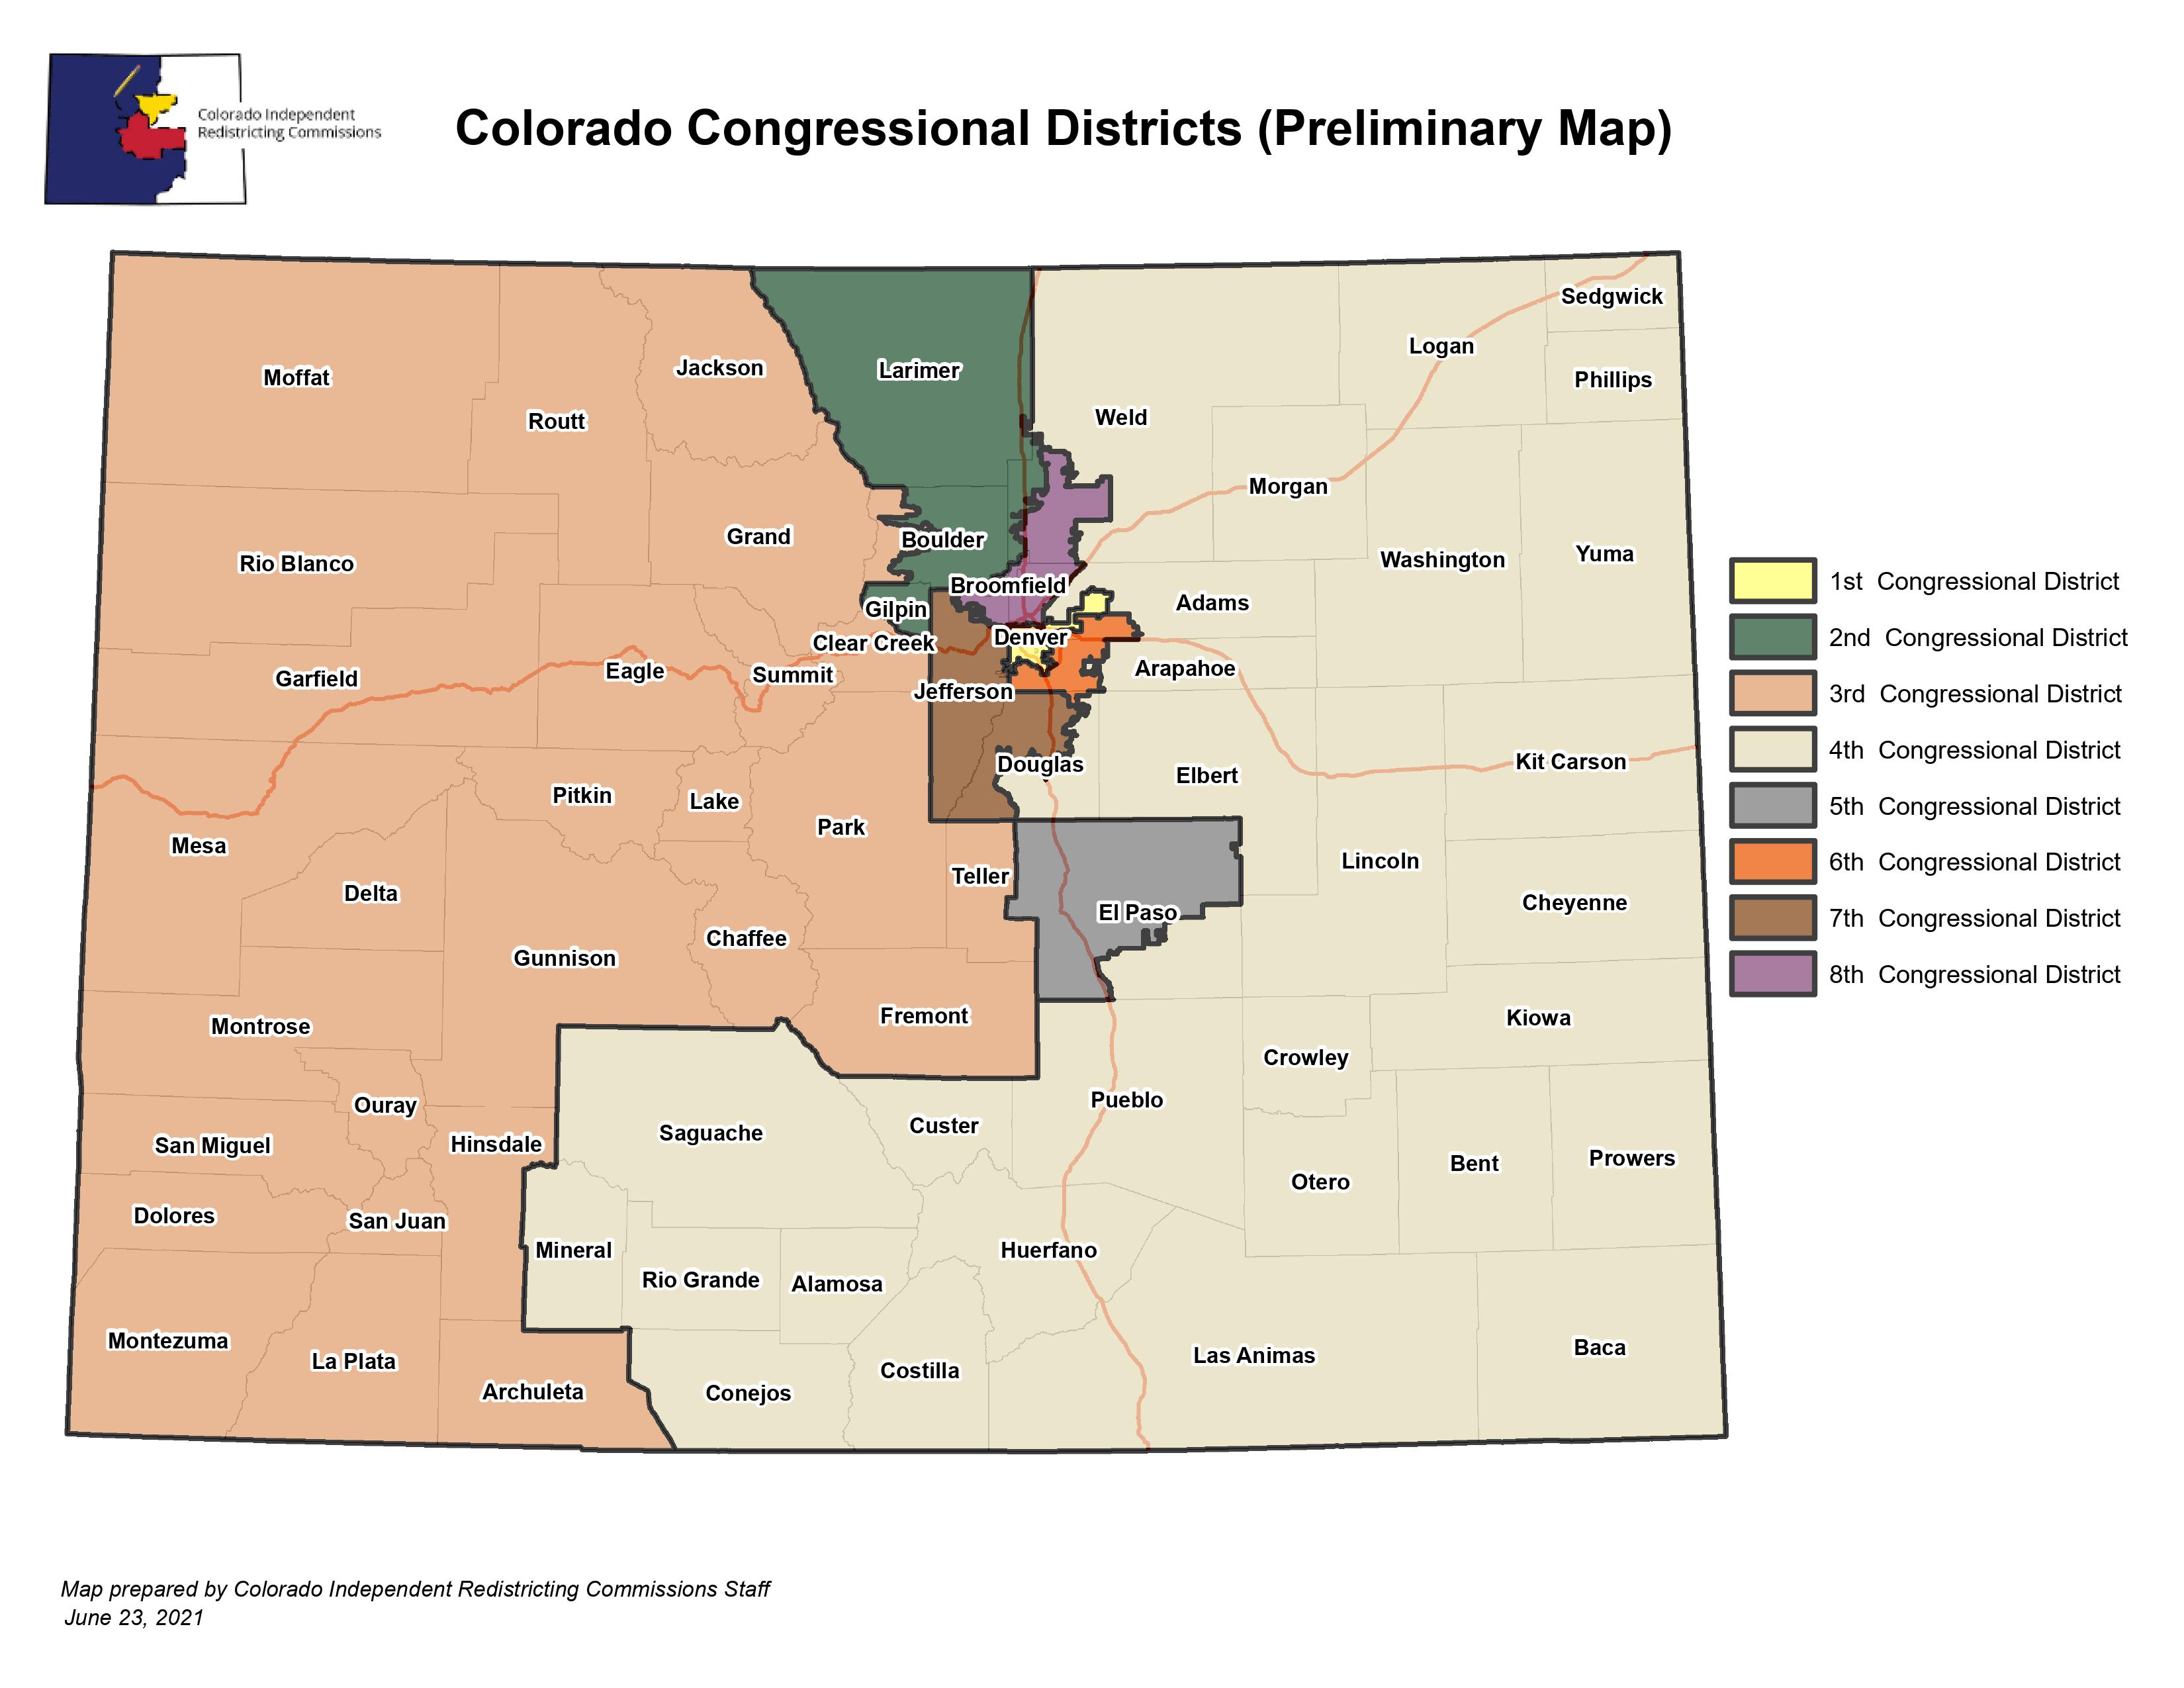 On Wednesday, Colorado’s new Congressional Commission staff released a first map of the newly drawn eight congressional districts. It will next be taken around the state by the 12-member Congressional Commission to gather public input.       In an interview with KOA’s morning host, April Zesbaugh, she asked about the placement of the newest district in the north Denver metro area. The district location was suggested by the Hispanic community. Its placement is logical given the rapid growth in the area. Demo